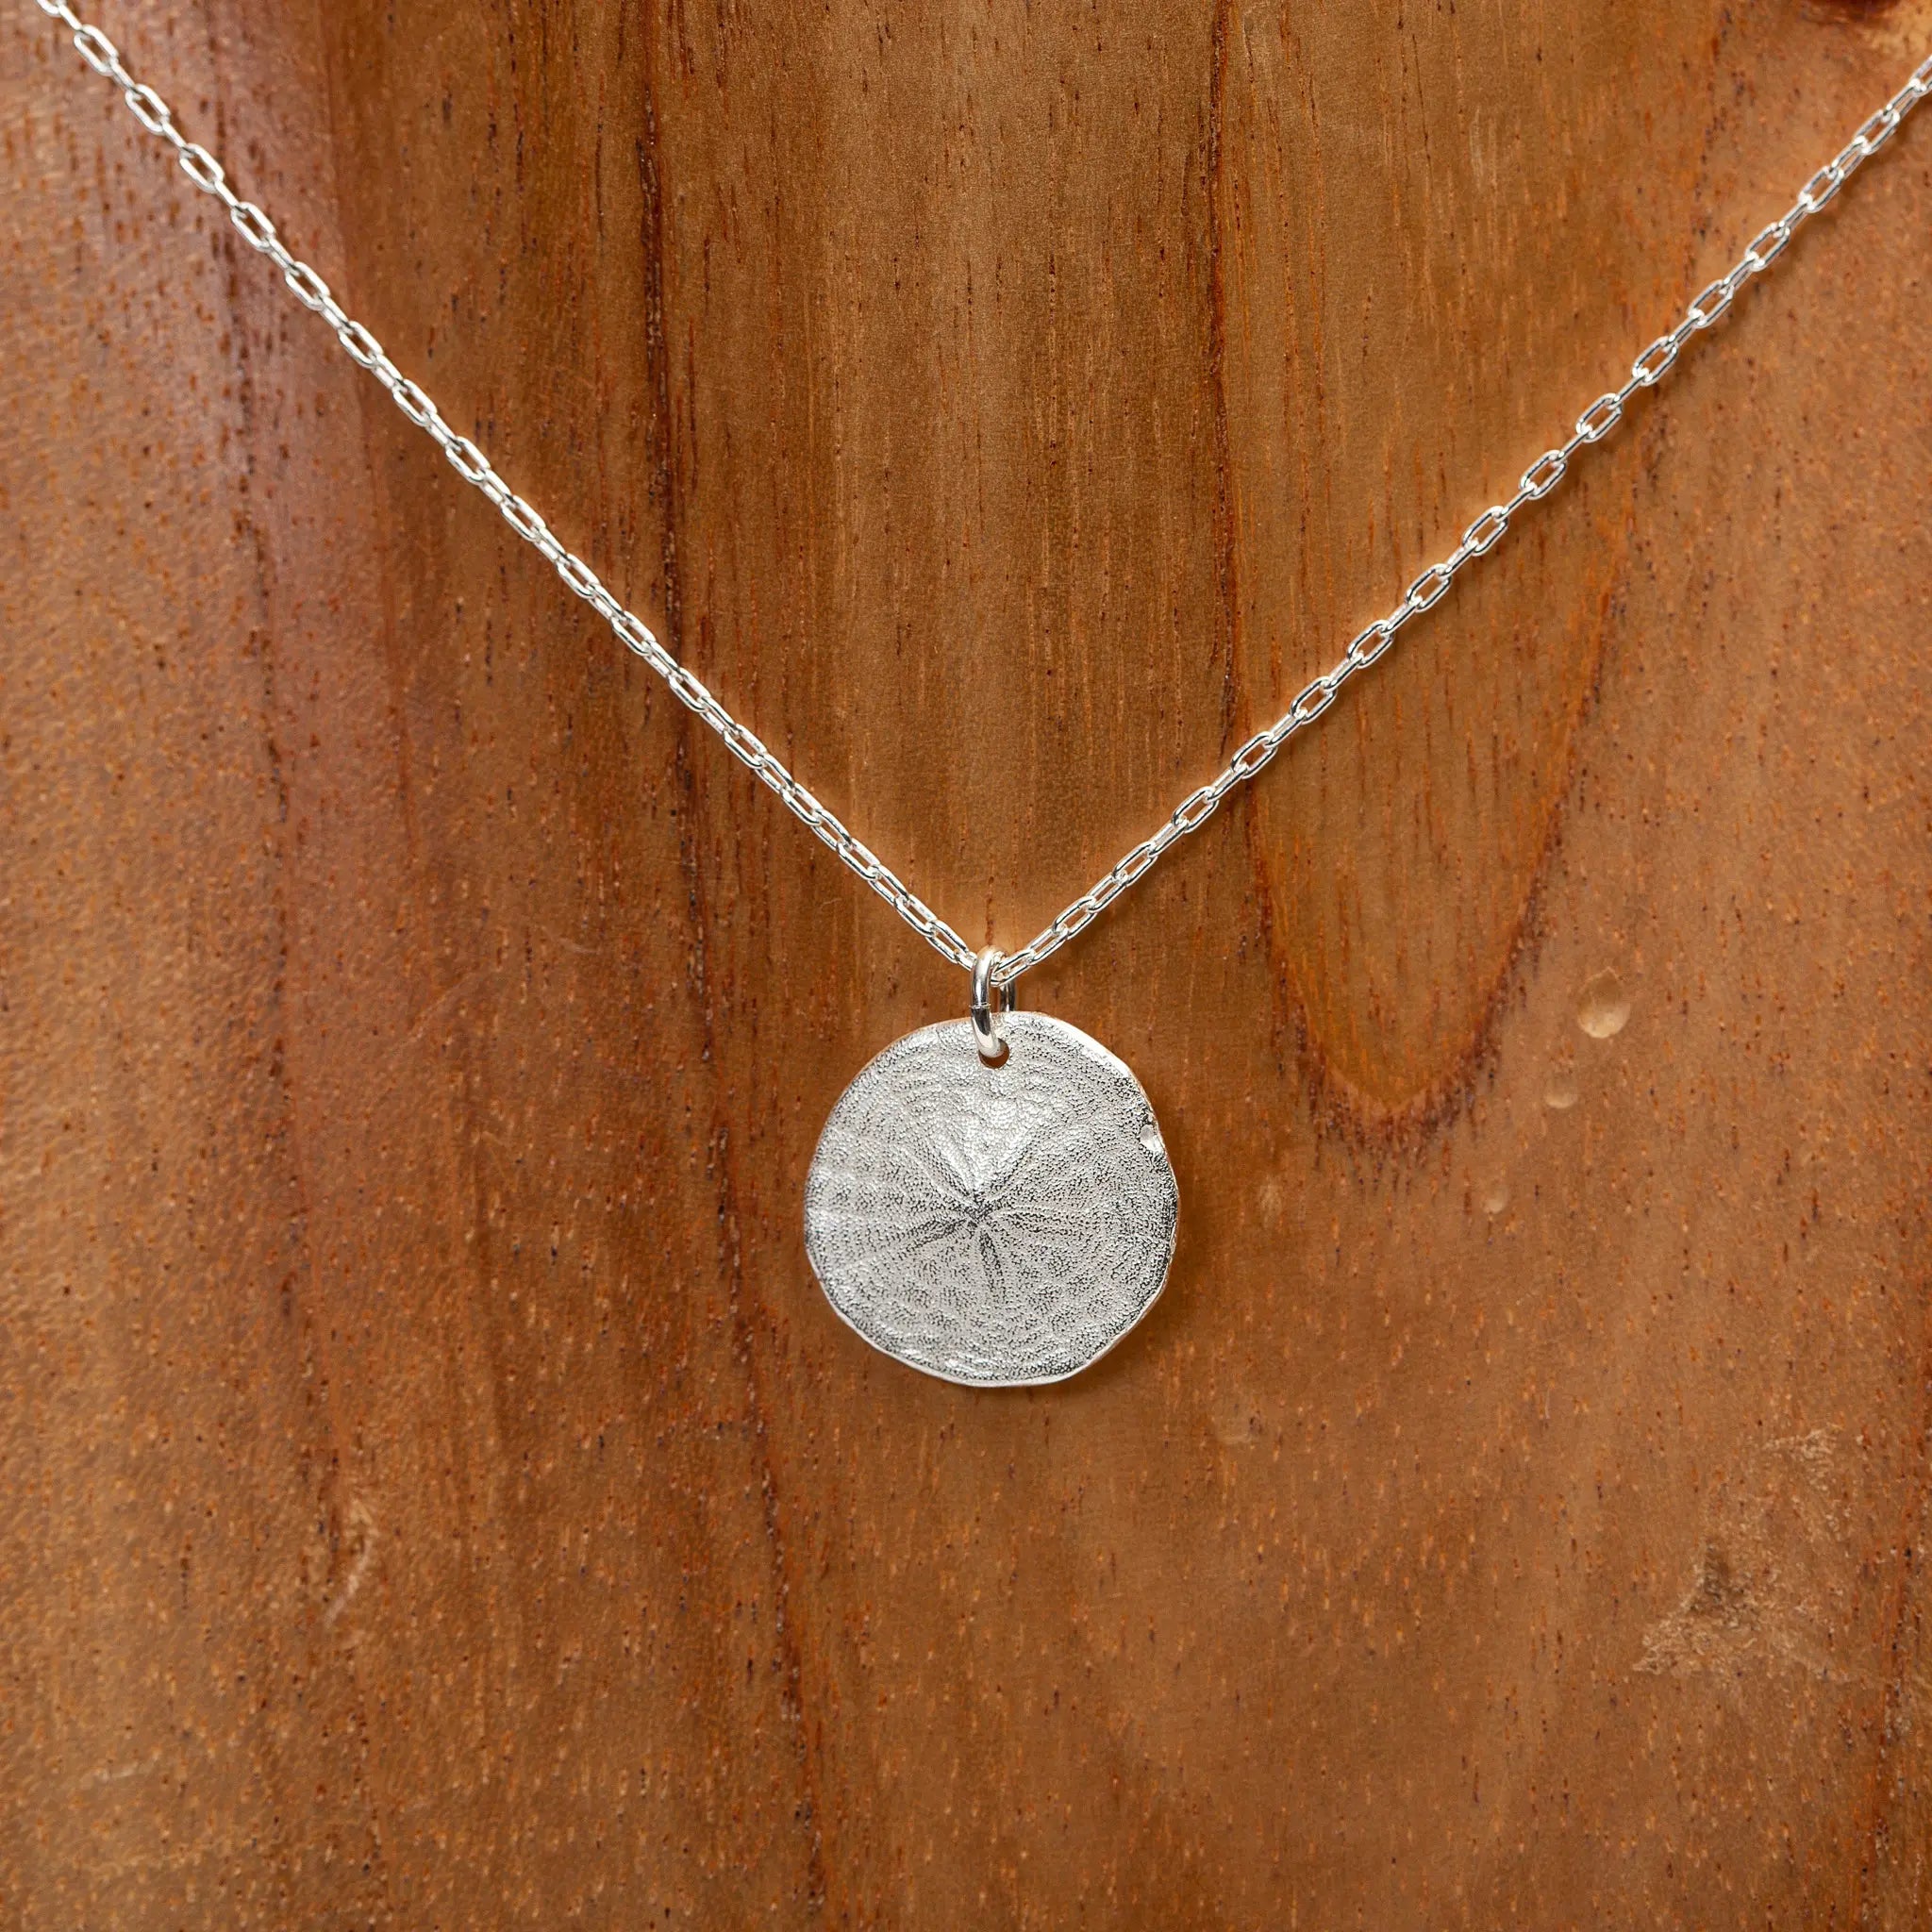 Coral Sand Dollar Necklace - Lisa-Marie's Made in Maine